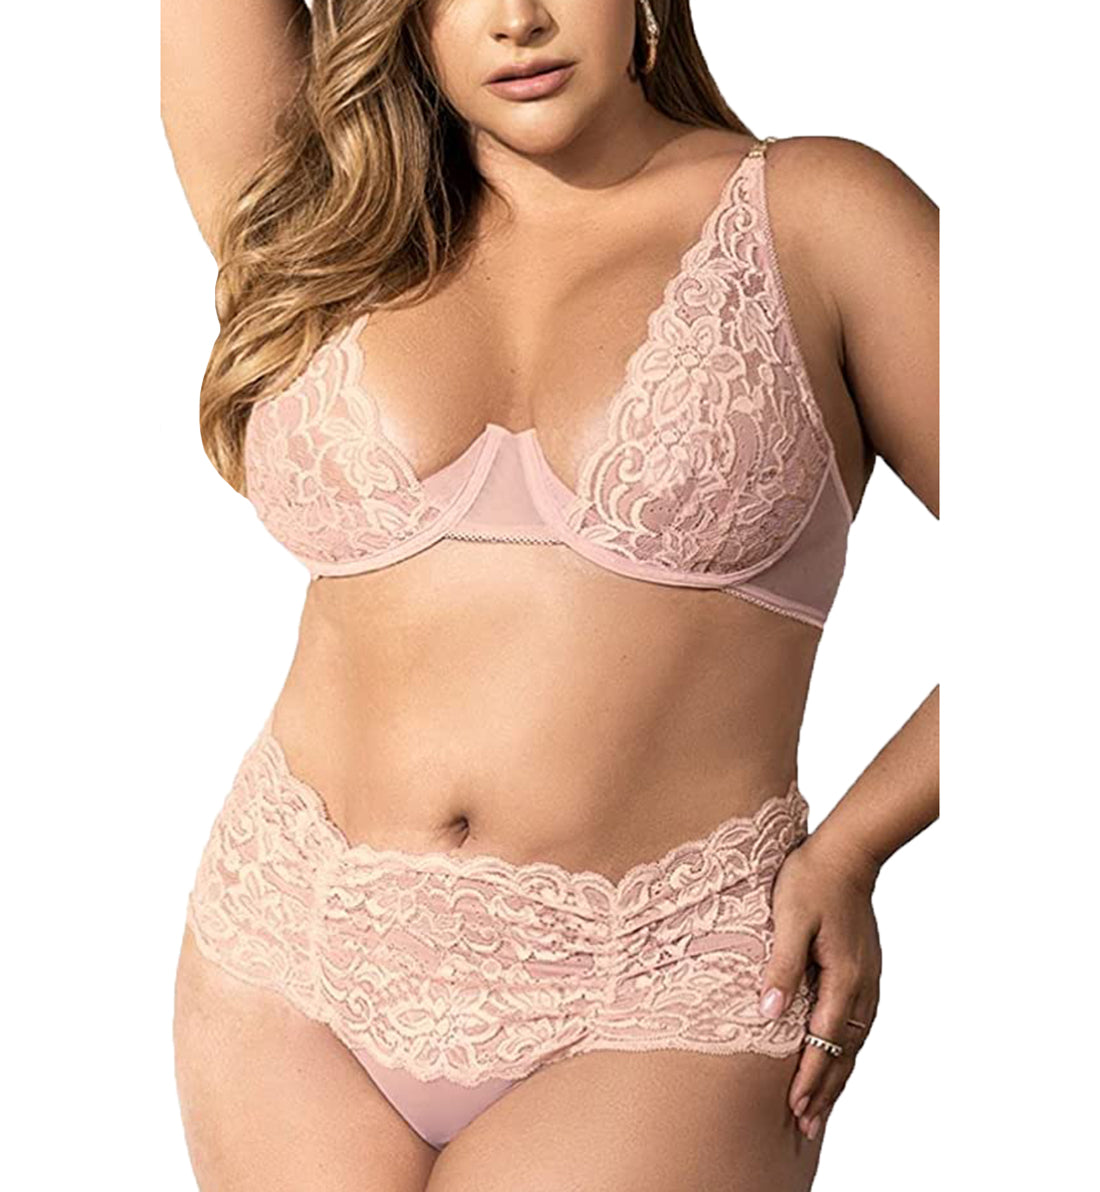 Mapale 2-in-1 Set PLUS: Babydoll, Underwire Bra, Lace-Up Back Thong (7373X),1X/2X,Rose - Rose,1X/2X